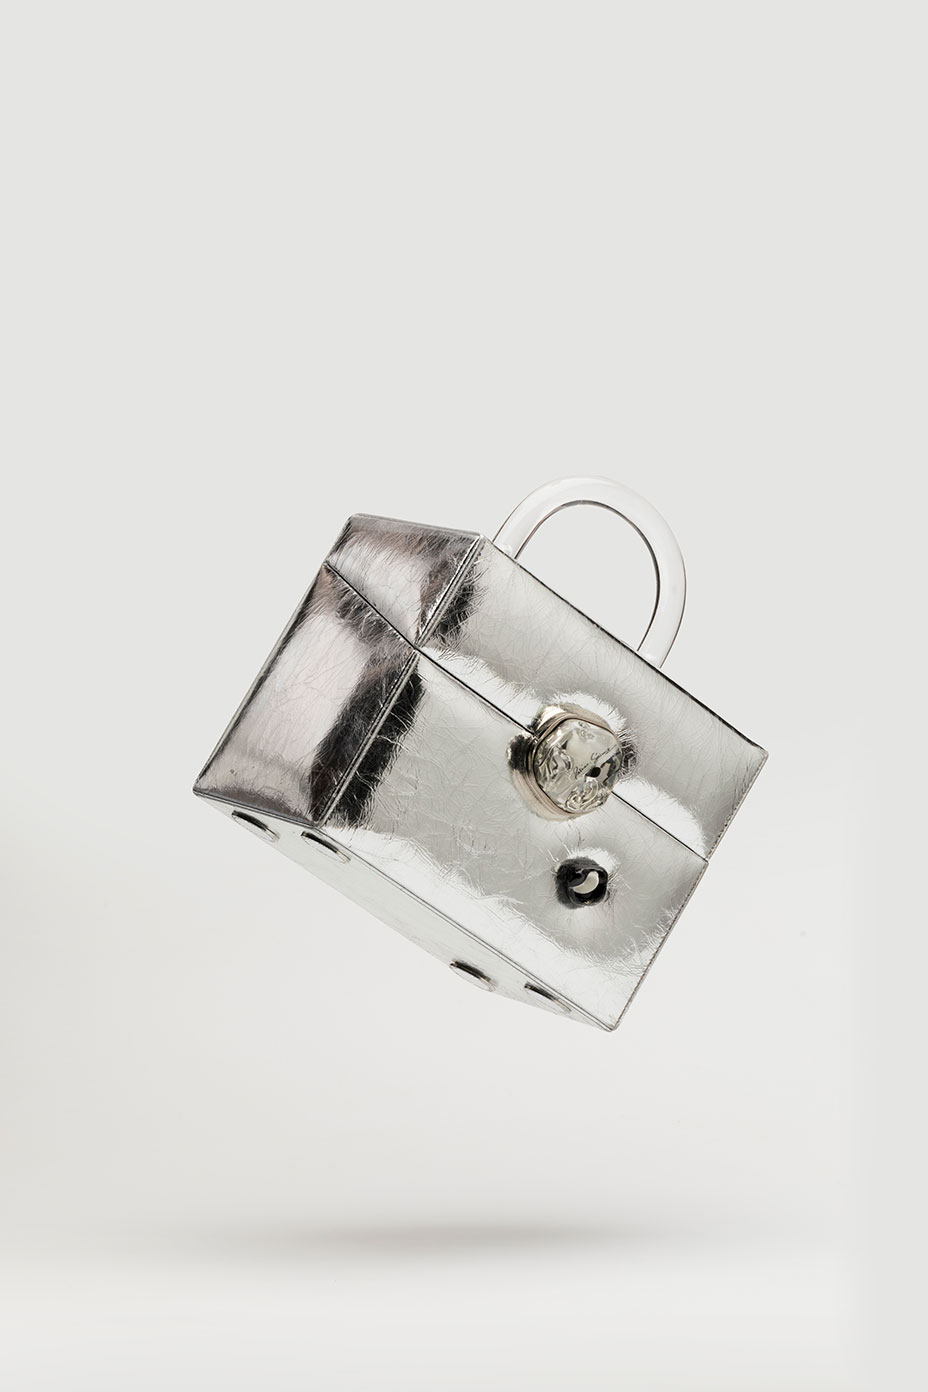 The Box bag in Silver leather is turned and is floating in the air on a white background